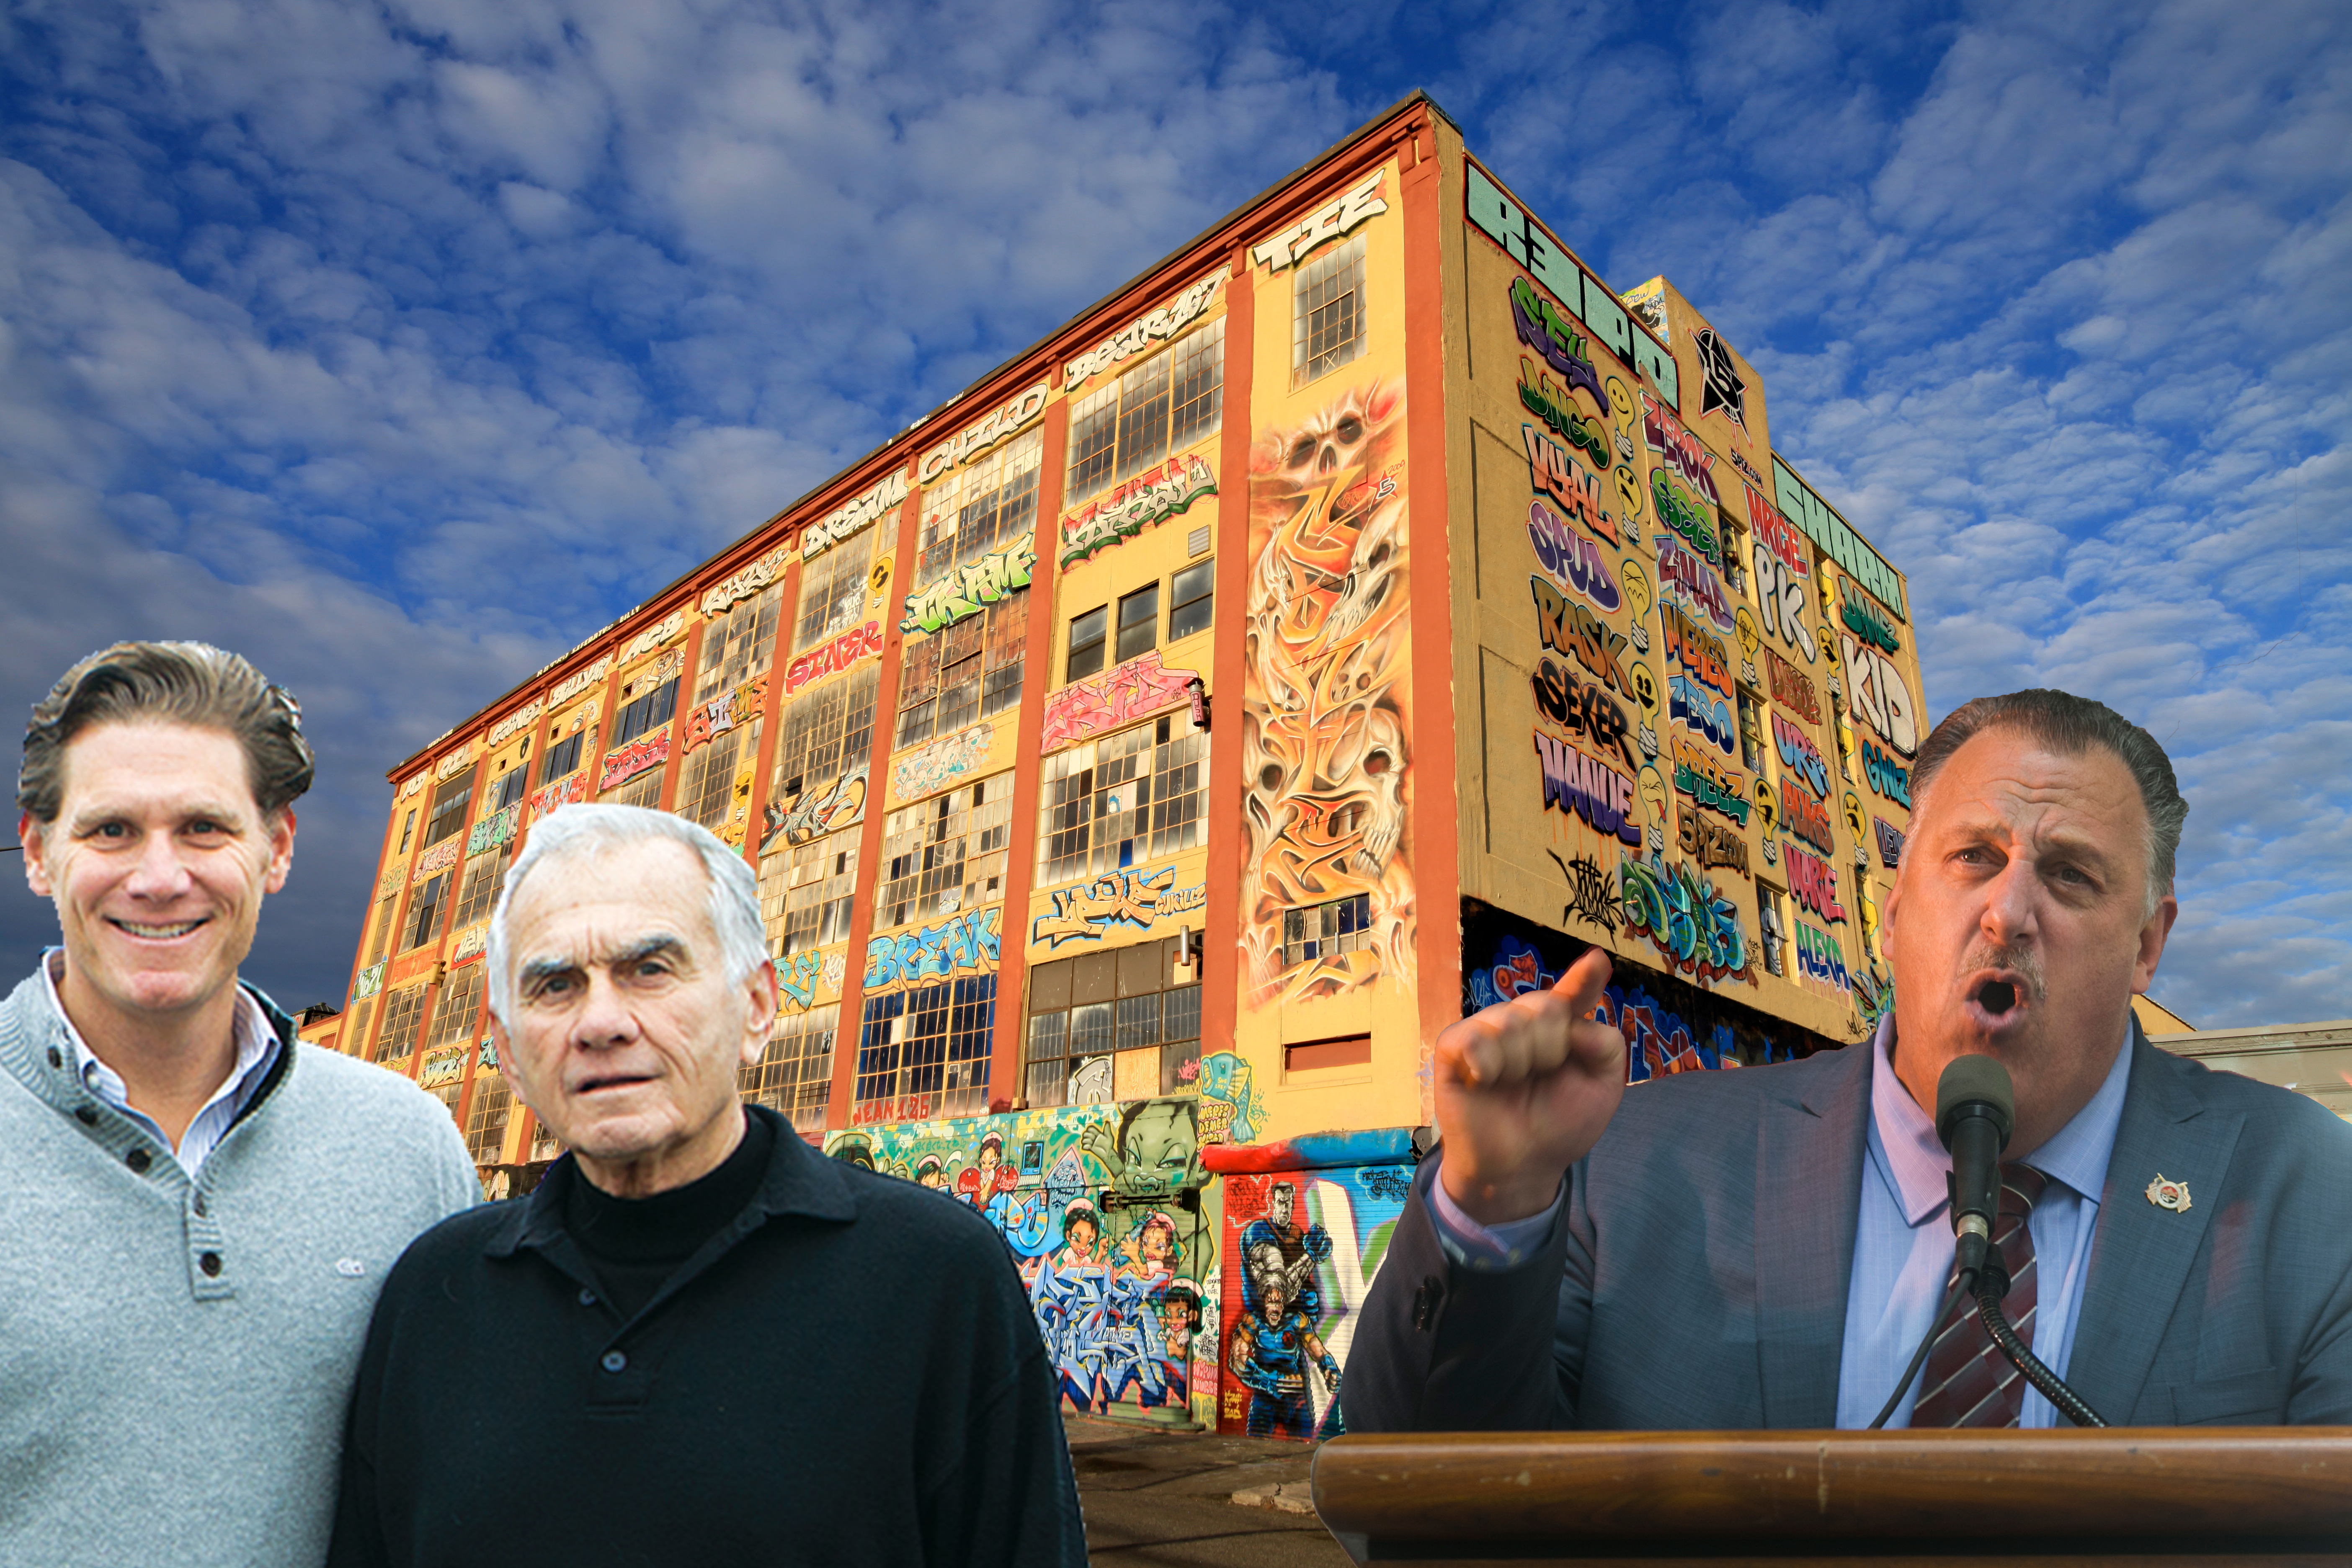 From left: David Wolkoff, Jerry Wolkoff, 5Pointz in Long Island City and Gary LaBarbera